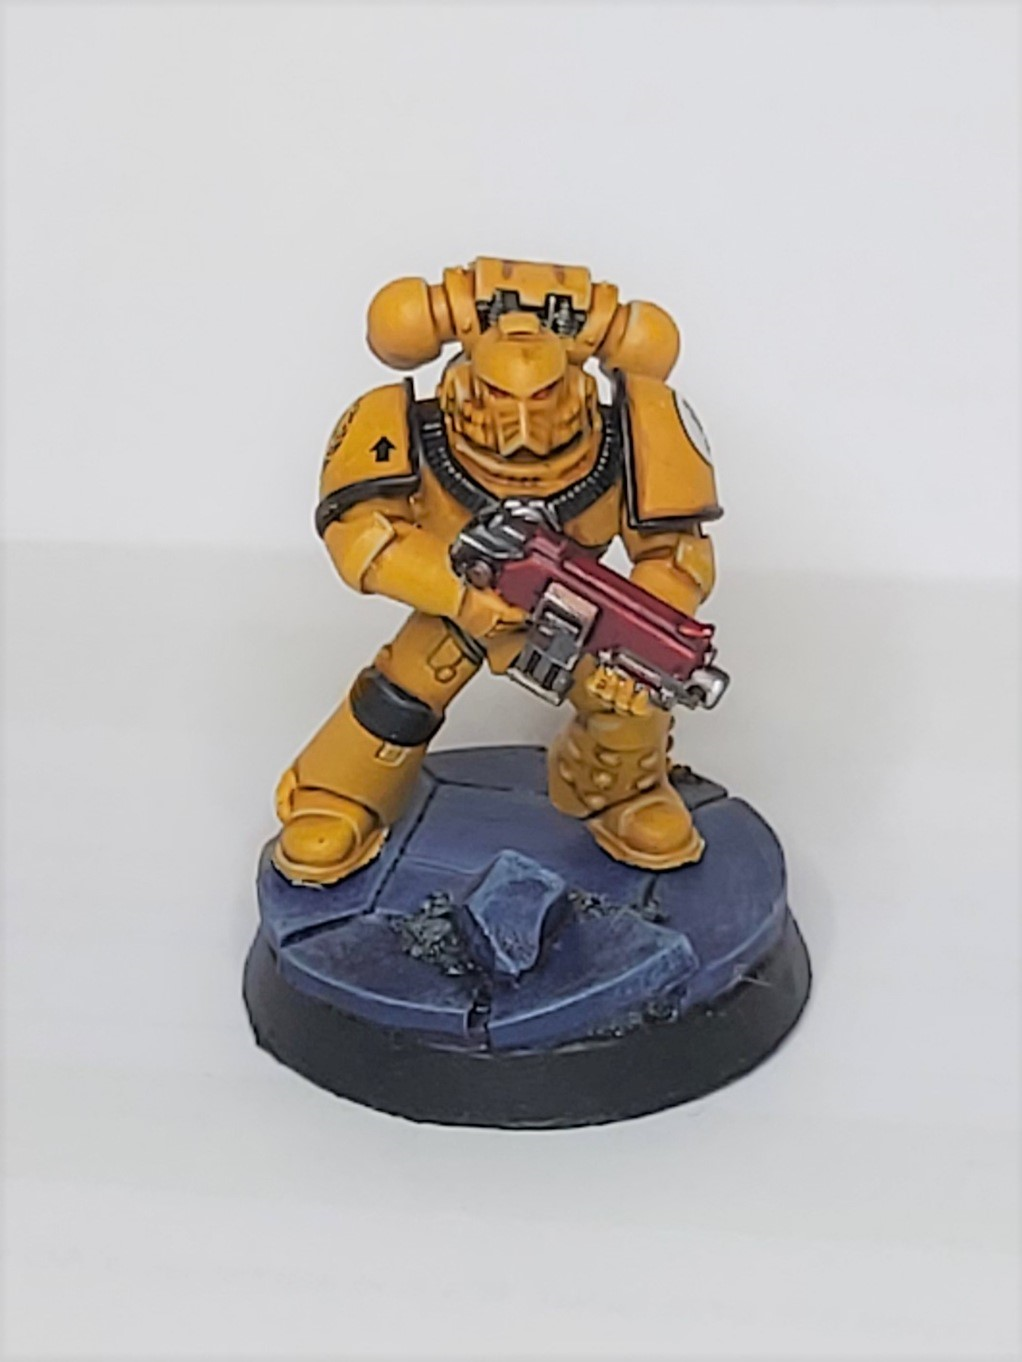 Model imperial fist, a space marine painted yellow and mounted on a sculpted base of blue rubble